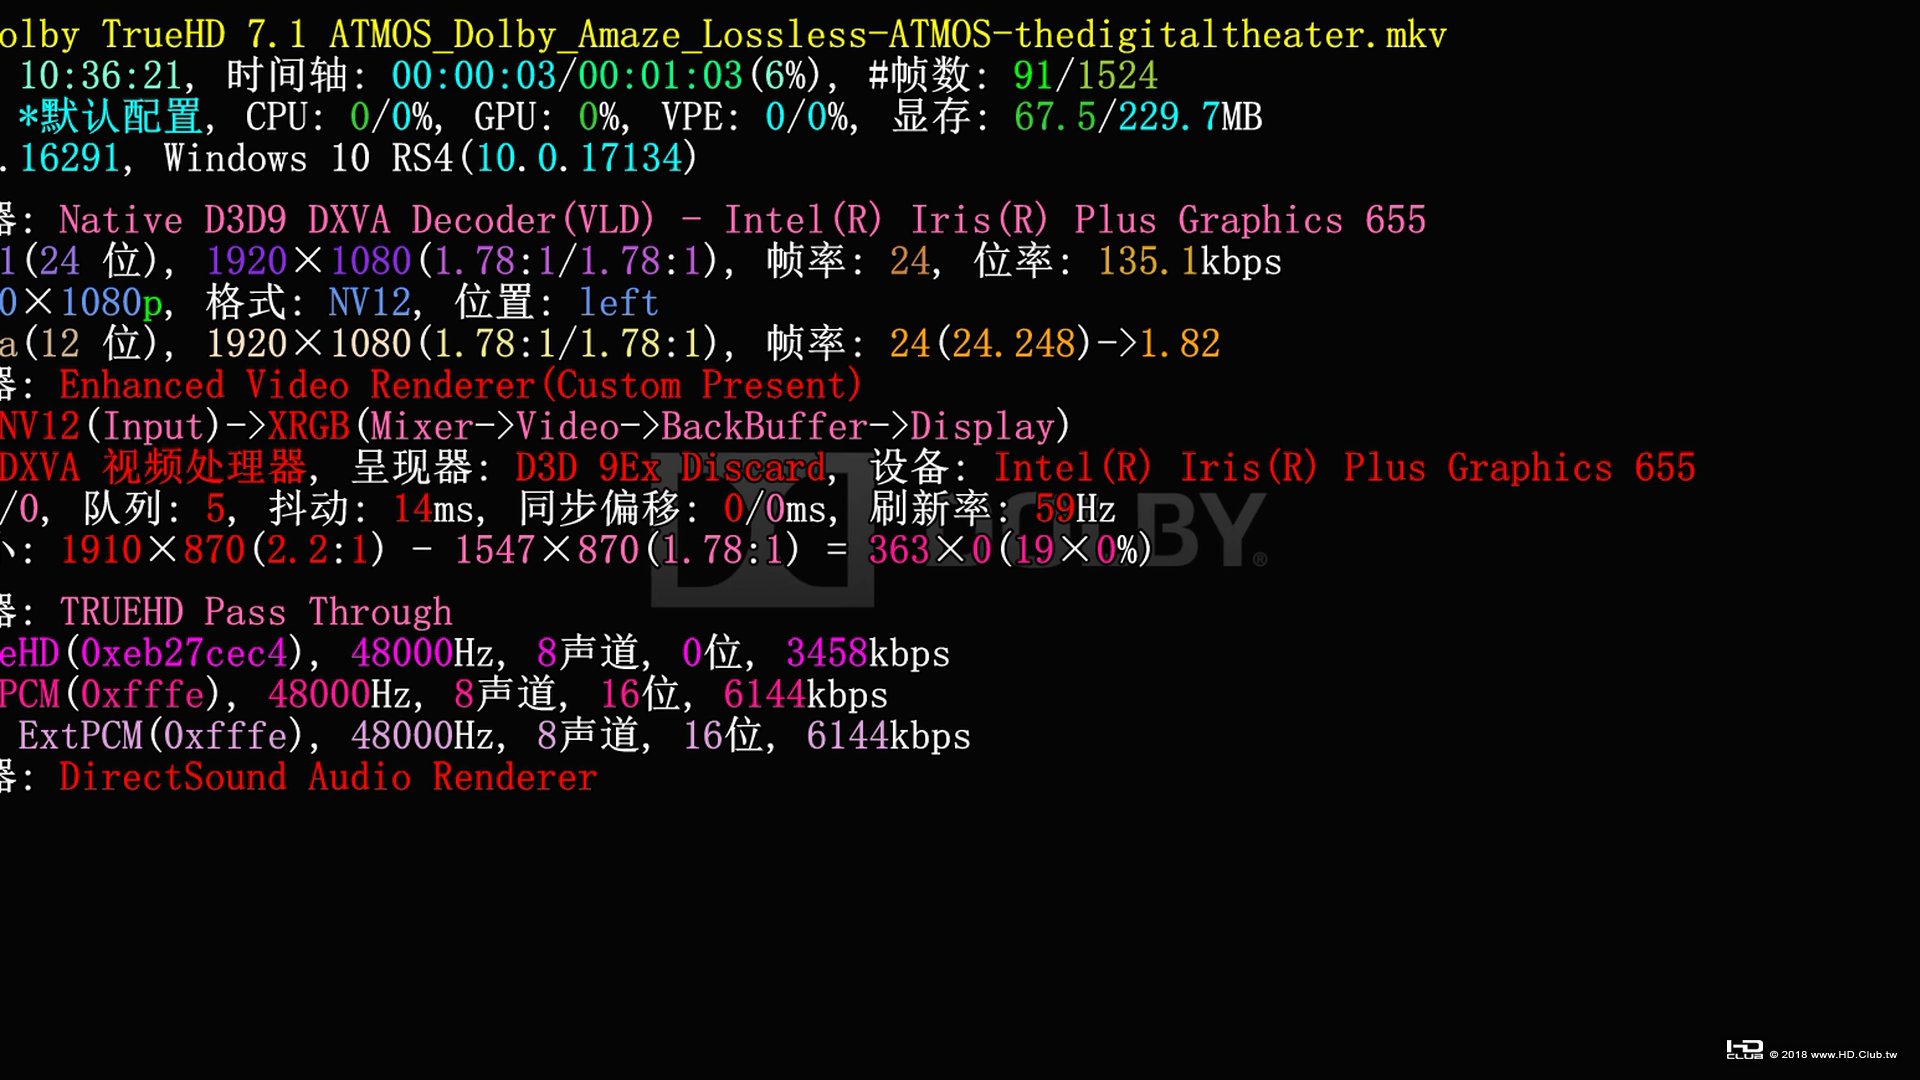 Dolby TrueHD 7.1 ATMOS_Dolby_Amaze_Lossless-ATMOS-thedigitaltheater.mkv_20190113.png